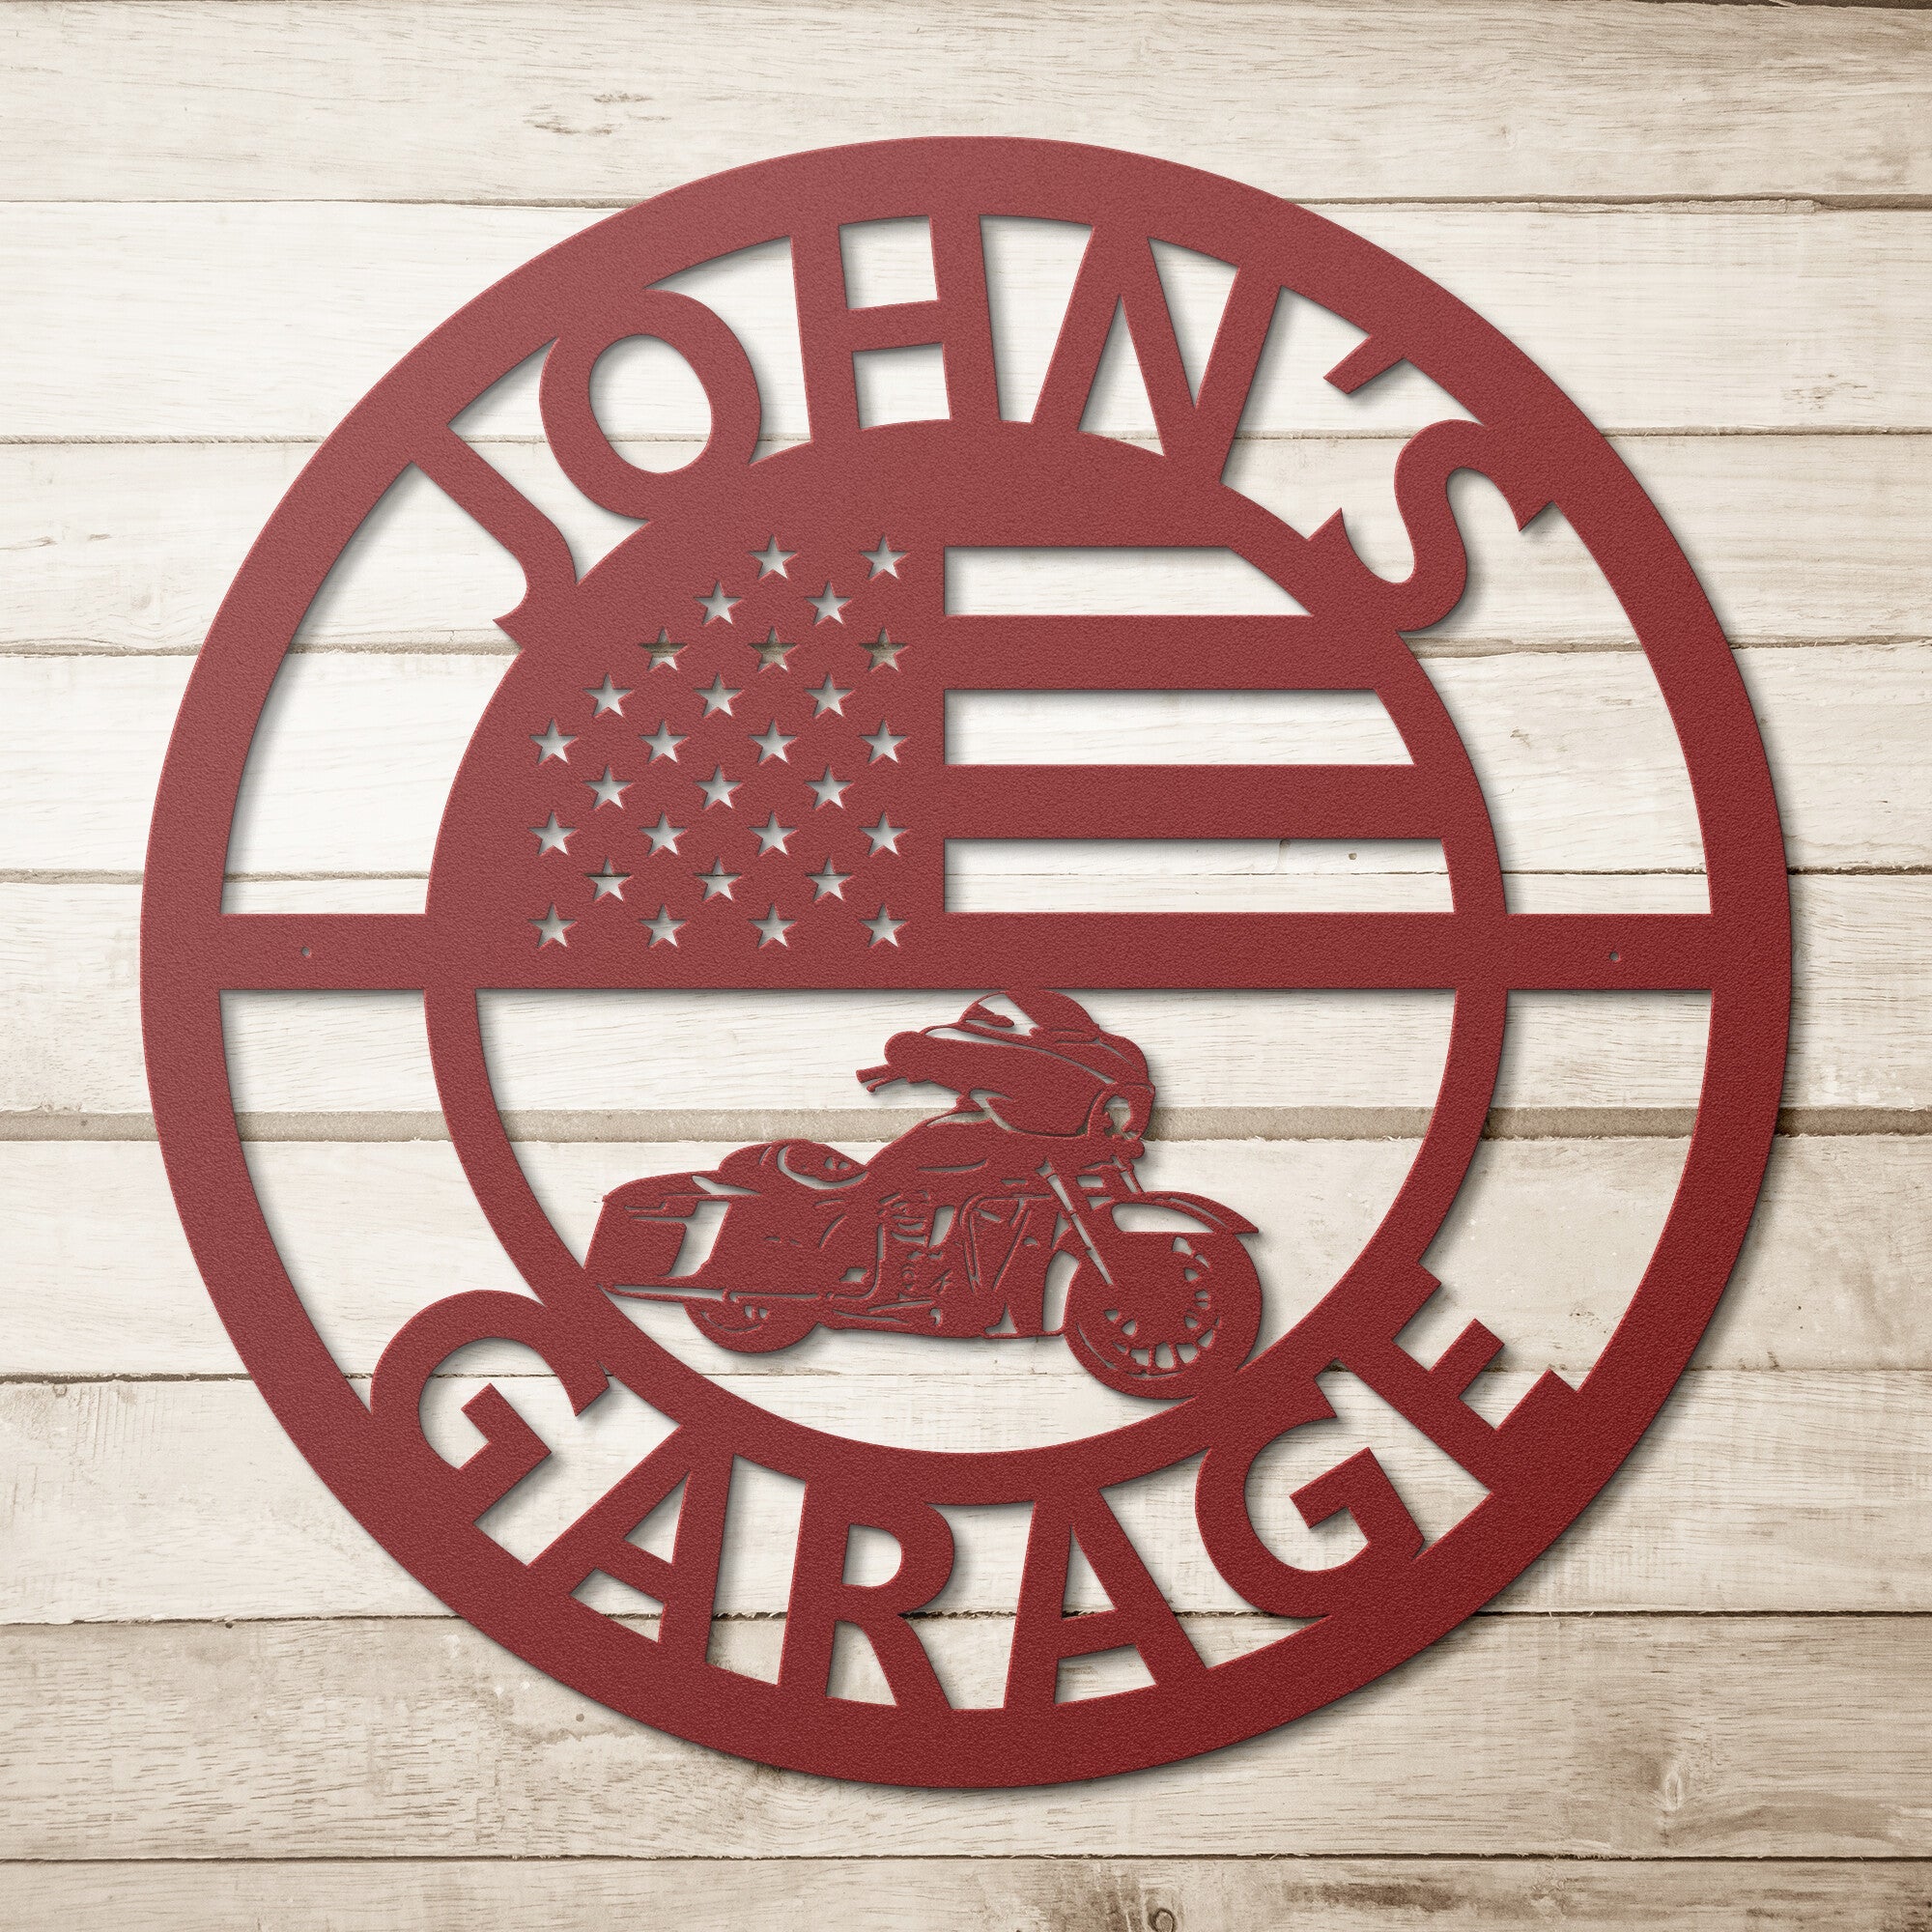 Personalized Street Glide Metal Sign - Cool Metal Signs